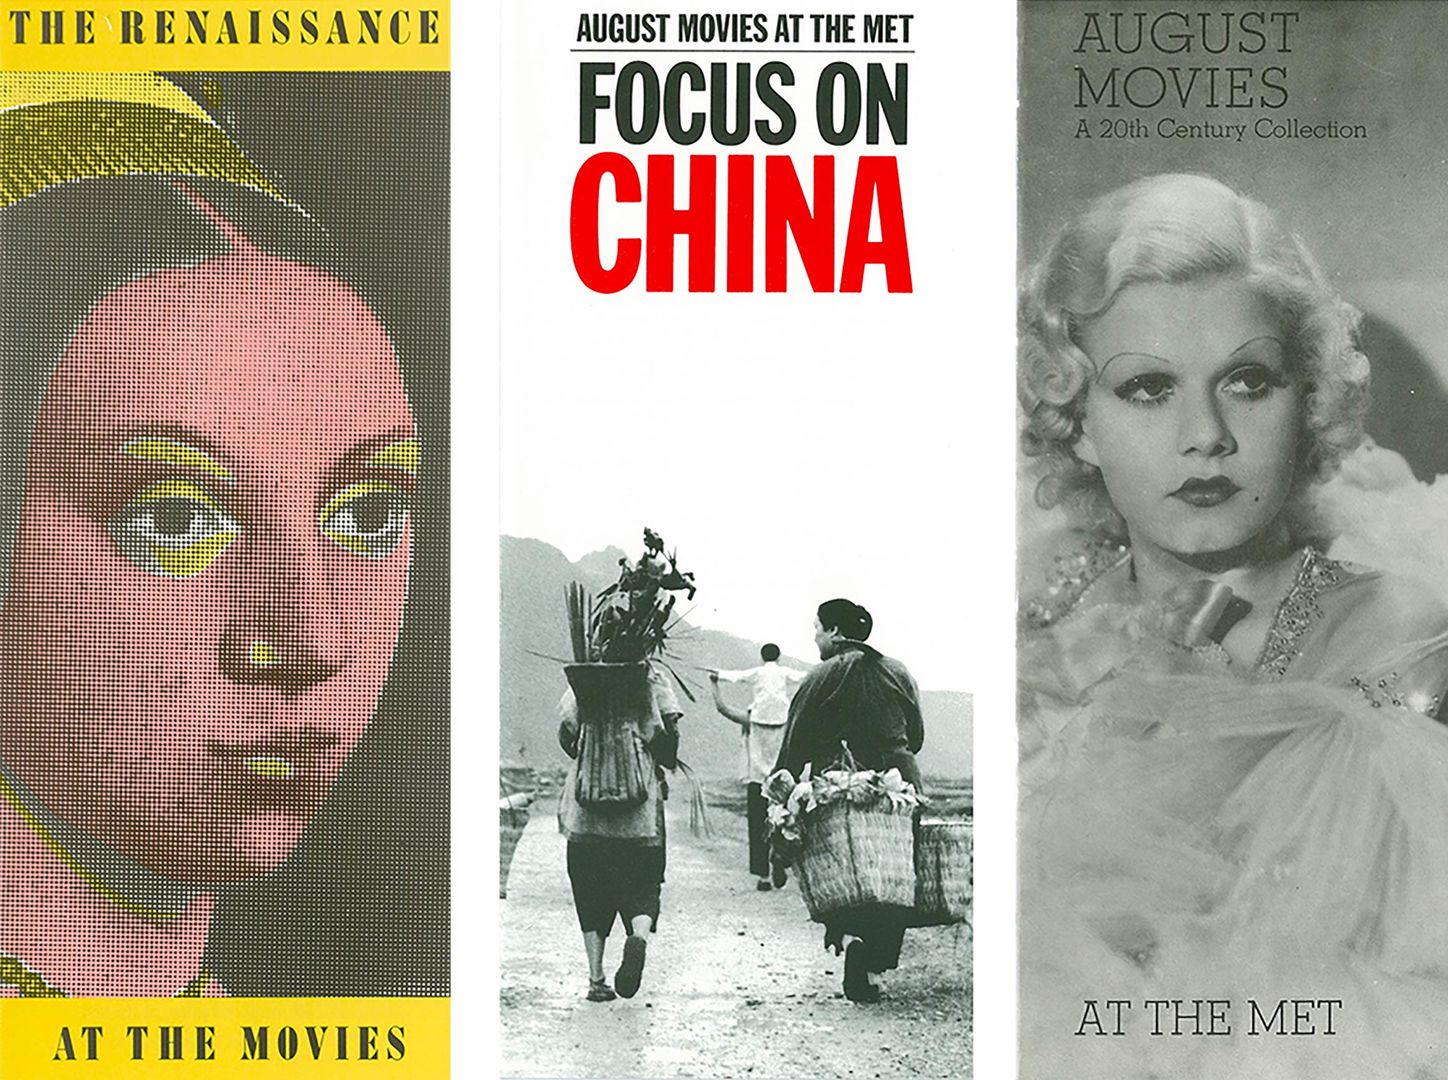 Three brochures advertising August film series at The Met: (left to right) "The Renaissance" (1985), "Focus on China" (1988), and "A 20th Century Collection" (1987).